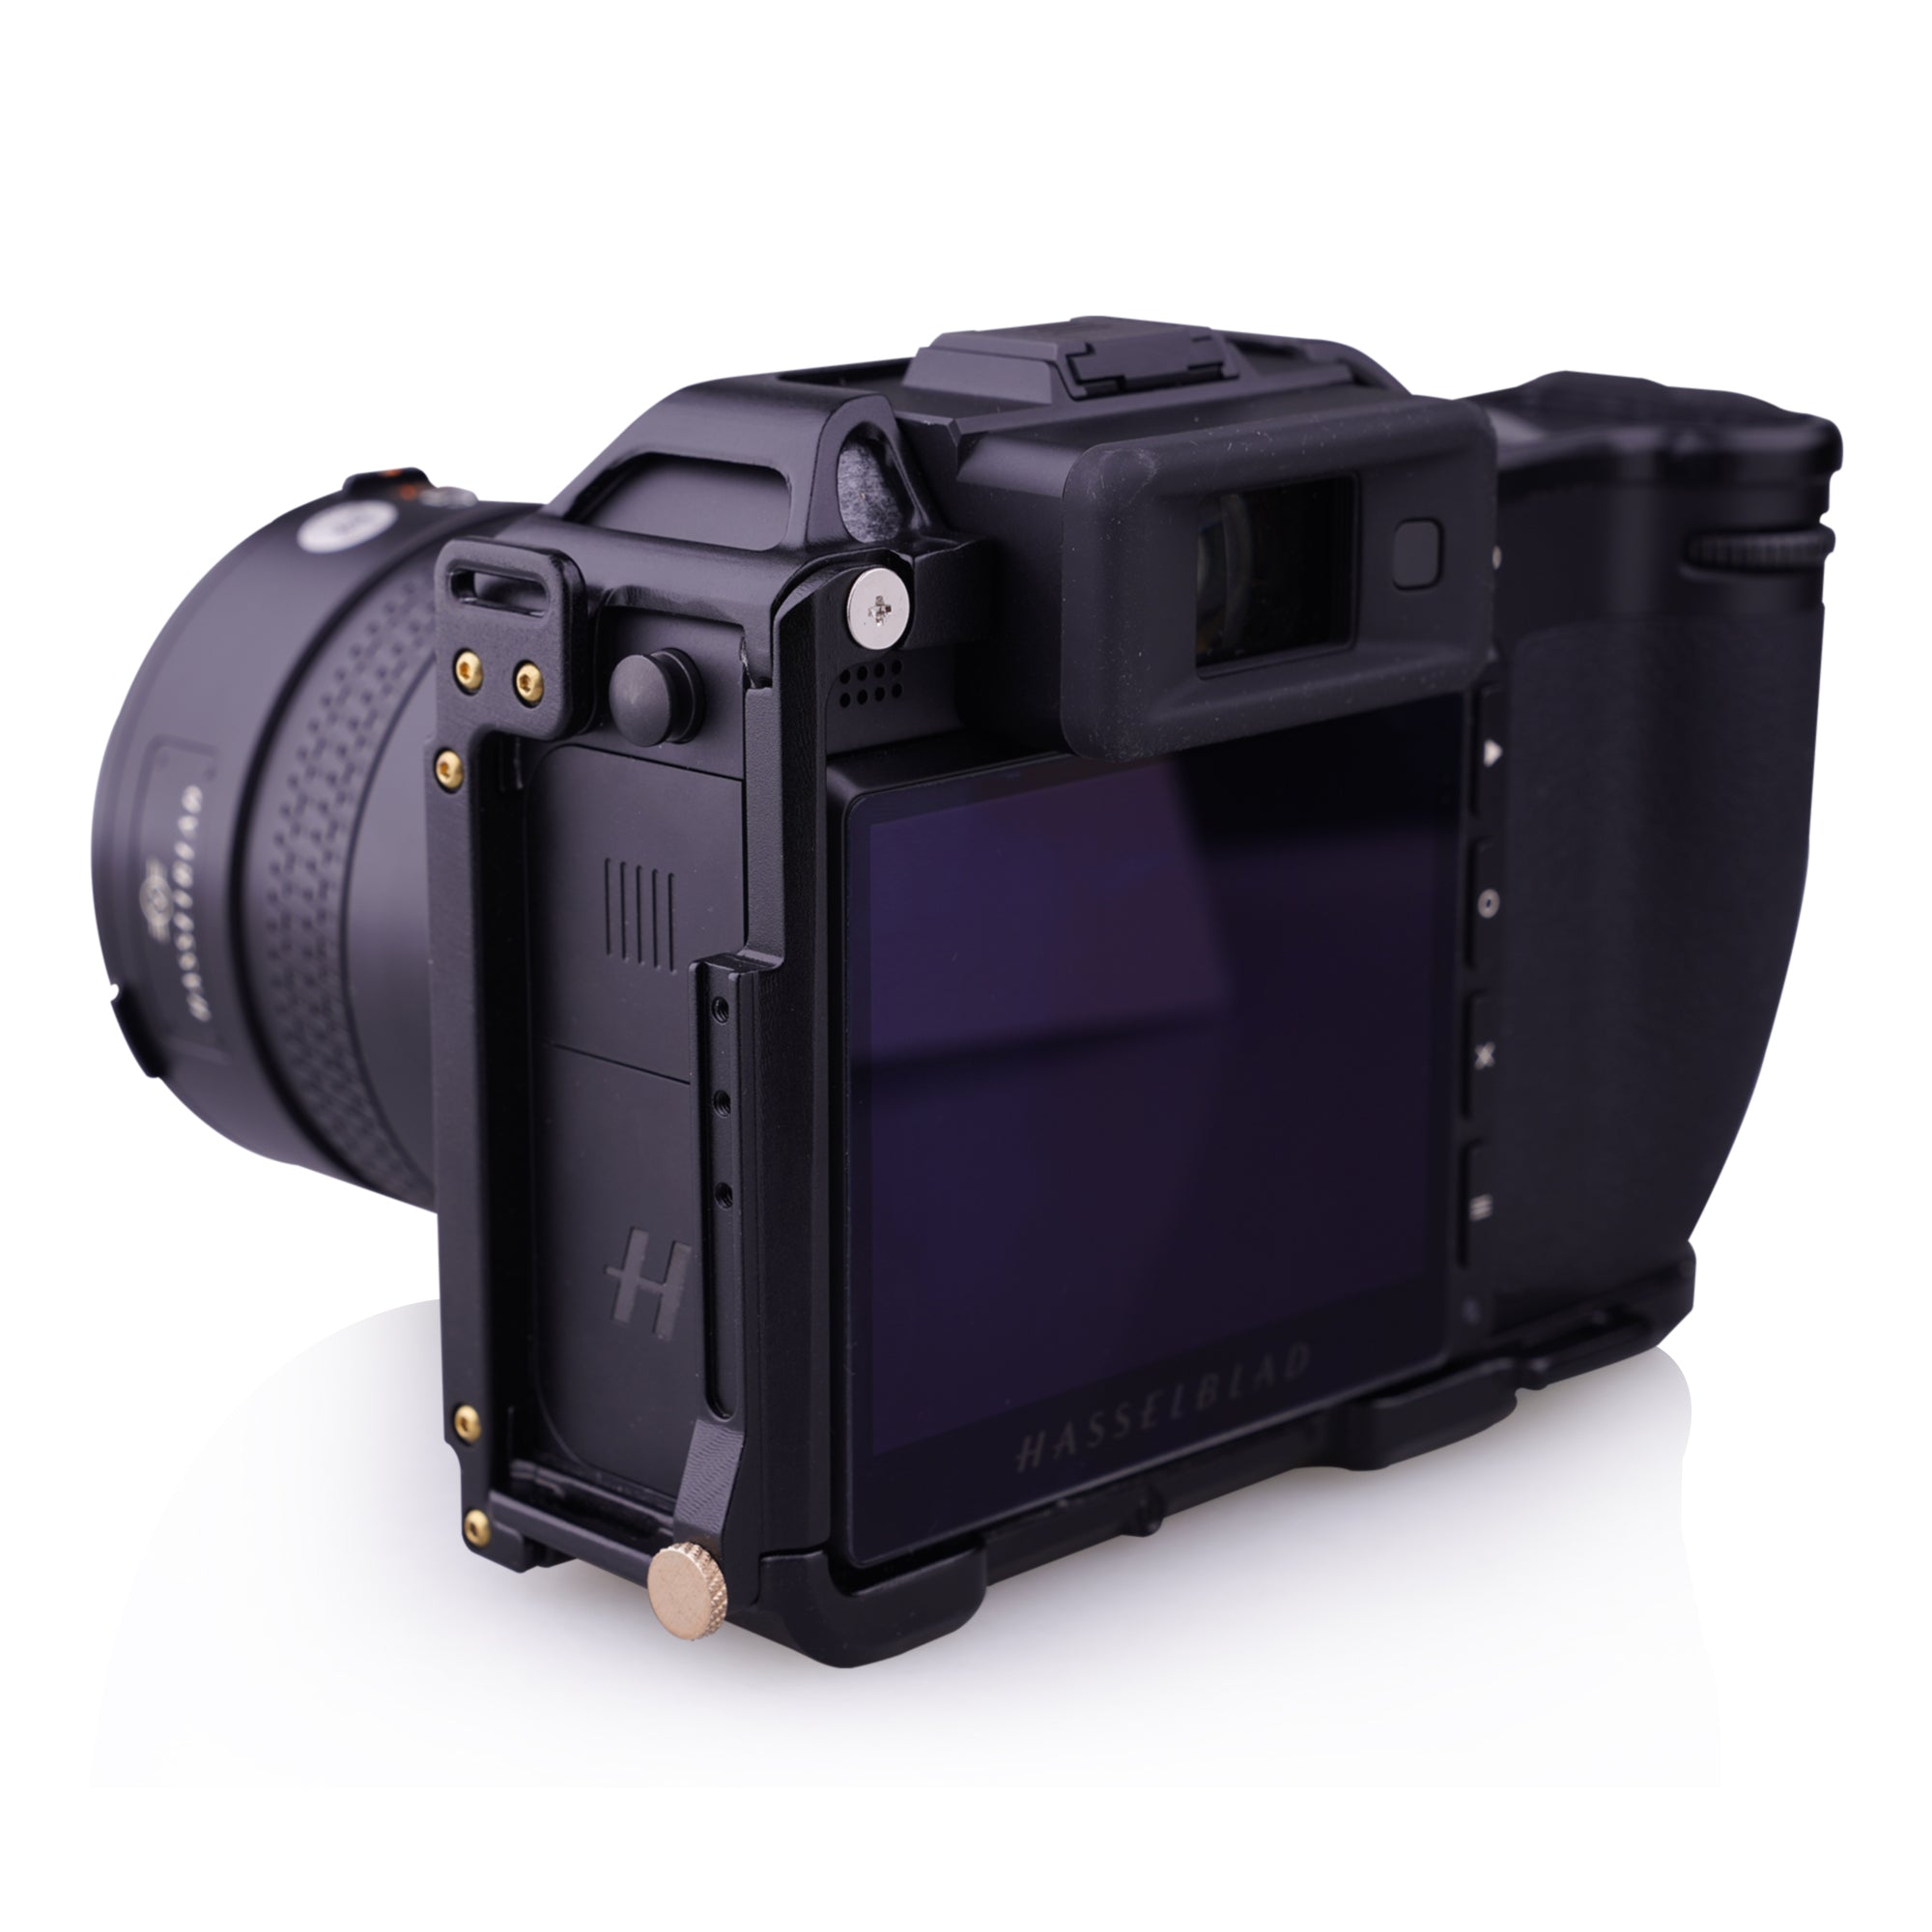 Lanhorse Modular Camera Cage for Hasselblad X2D 100C, Lens Protector Frame Options.